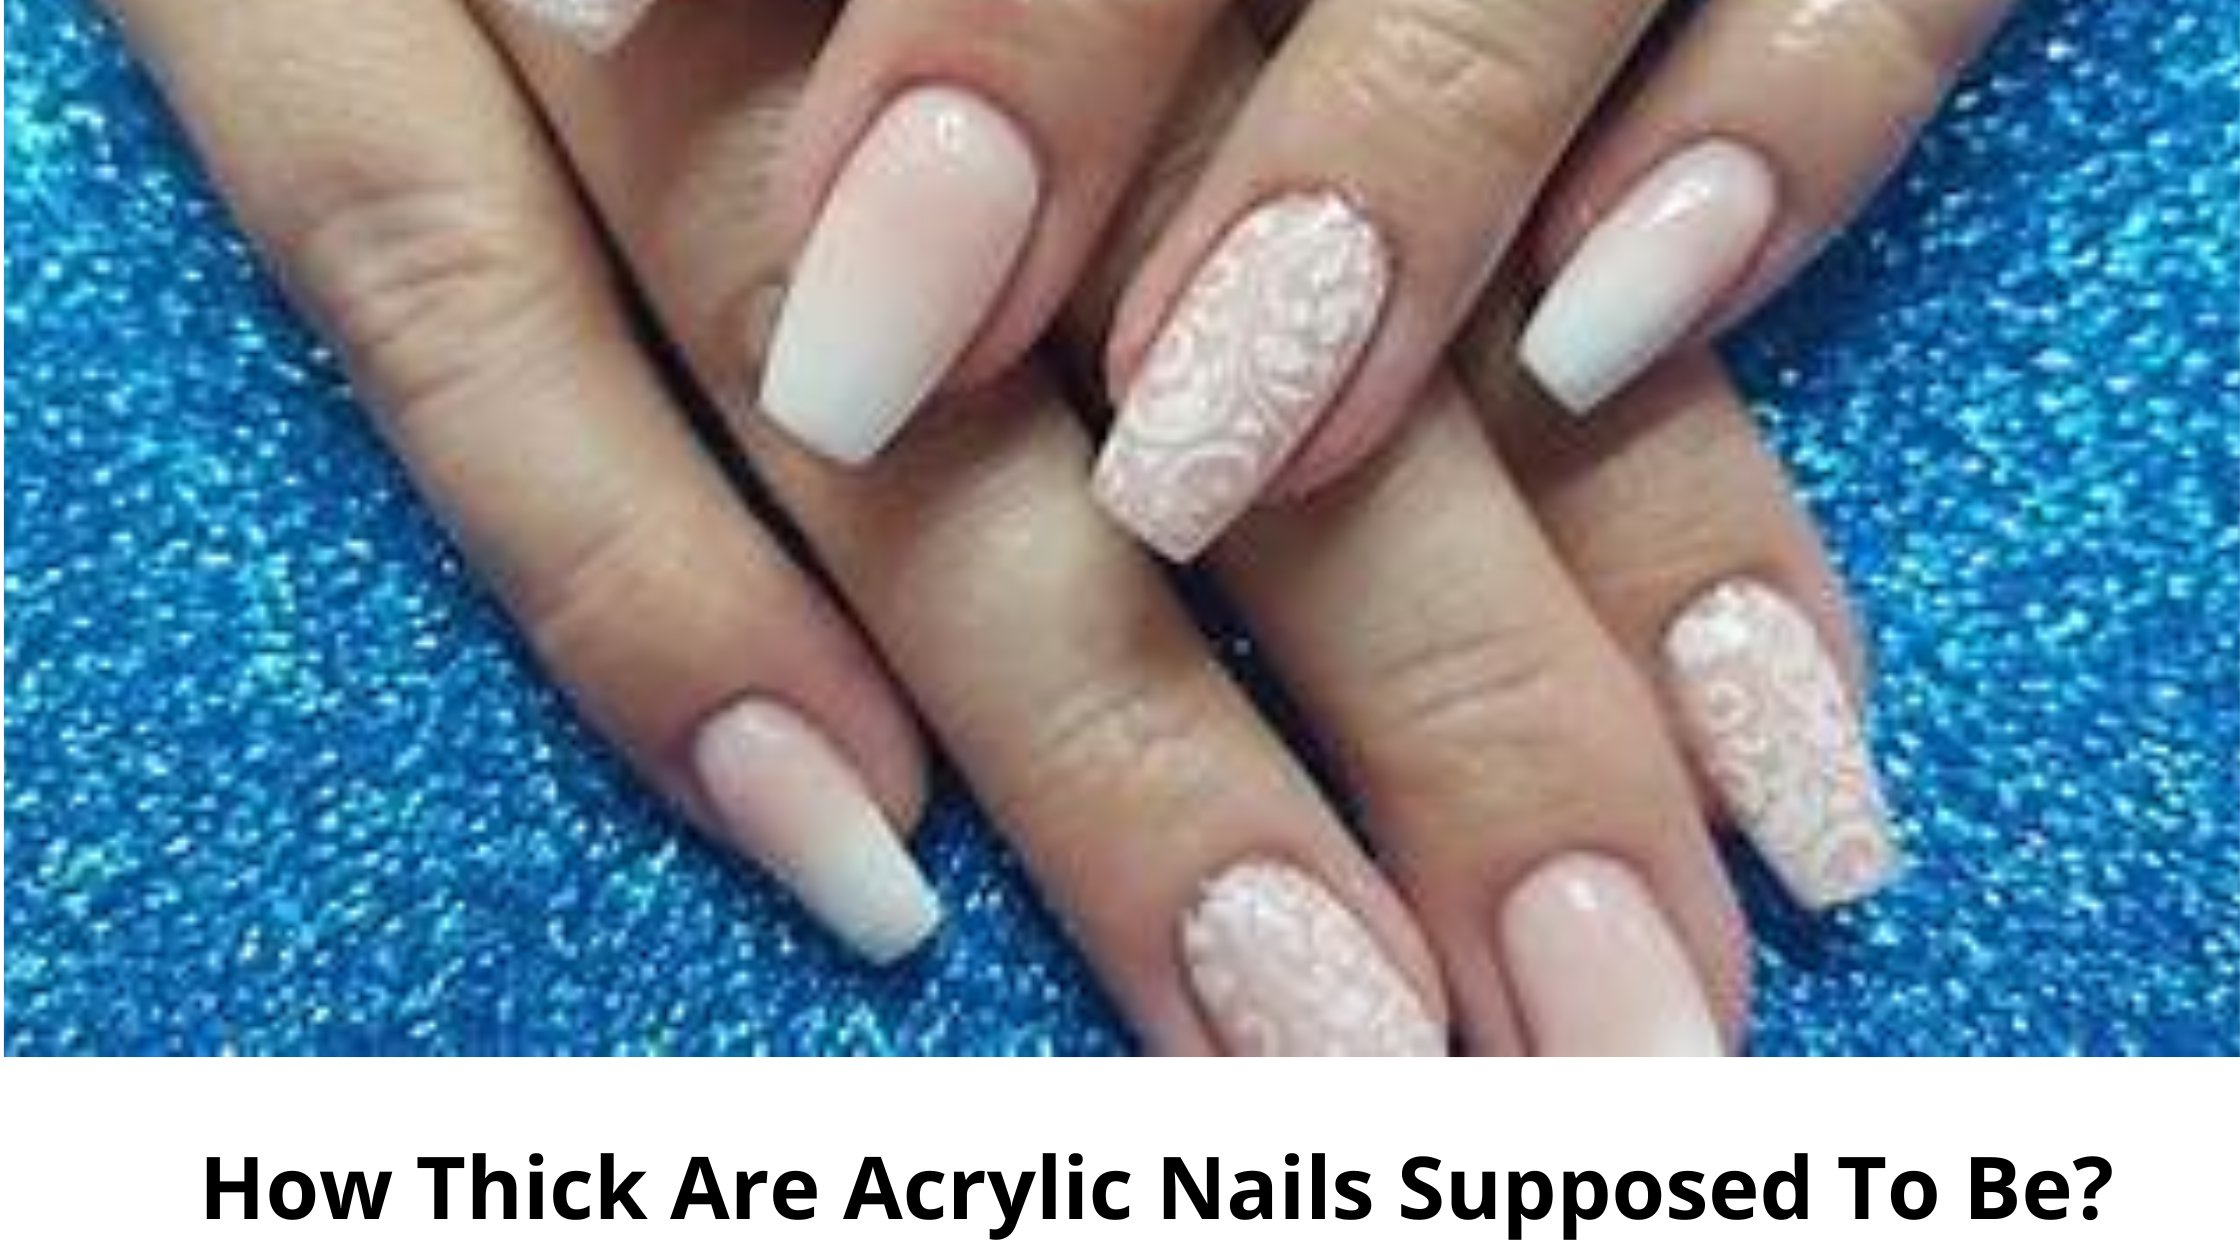 How Thick Are Acrylic Nails Supposed To Be?